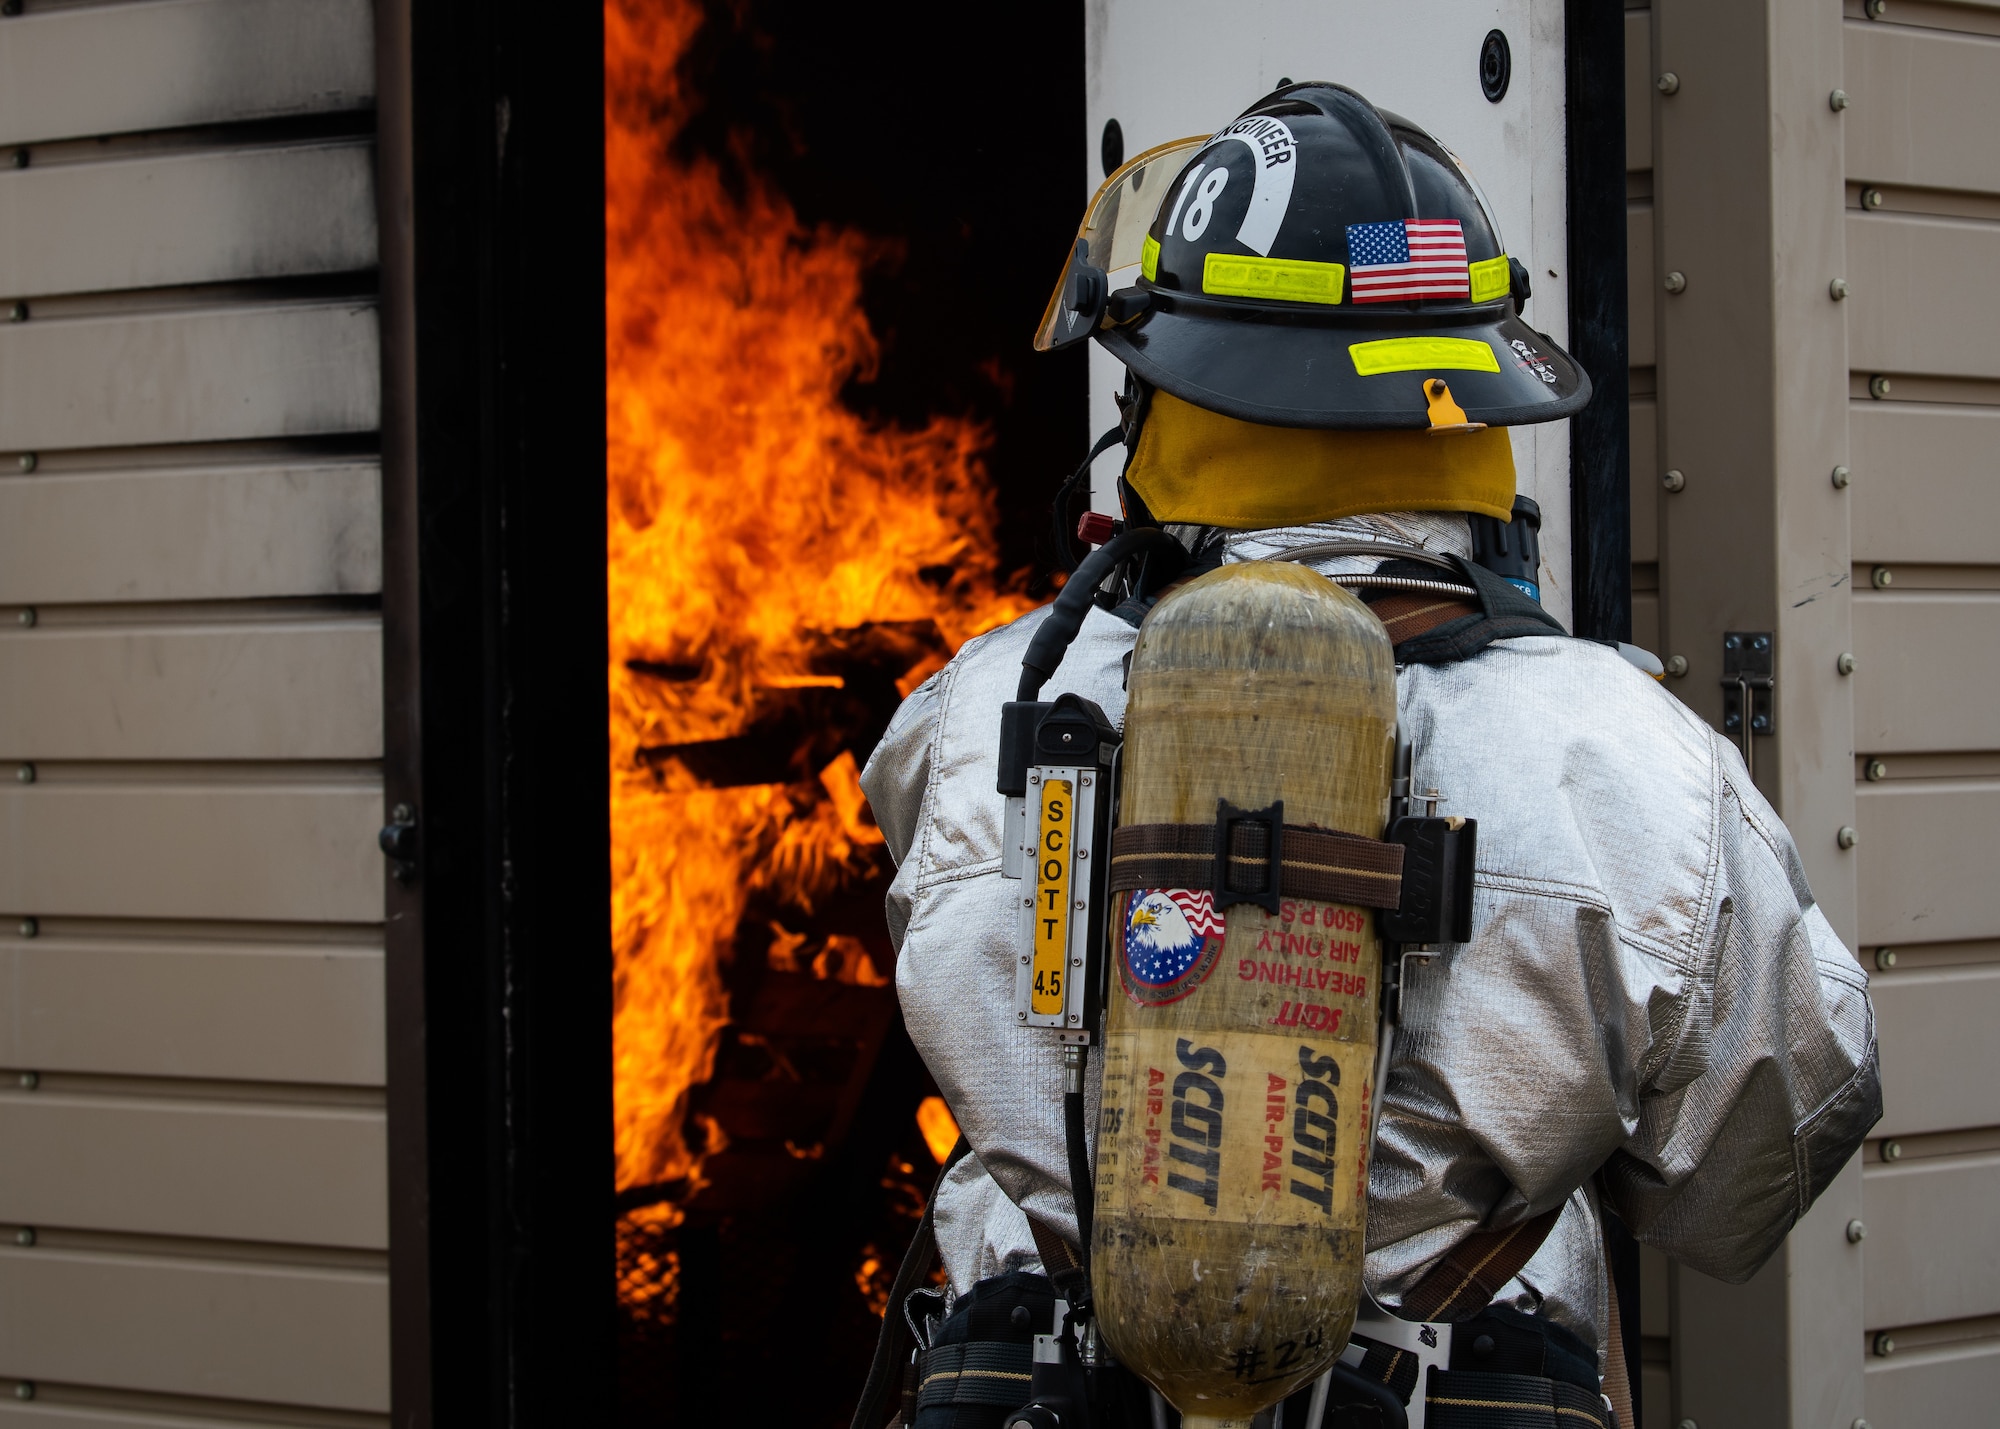 A Gila Bend Air Force Auxiliary Field firefighter holds a door open during a joint aircraft and structural fire training, Nov. 14, 2018 at Luke Air Force Base, Ariz.